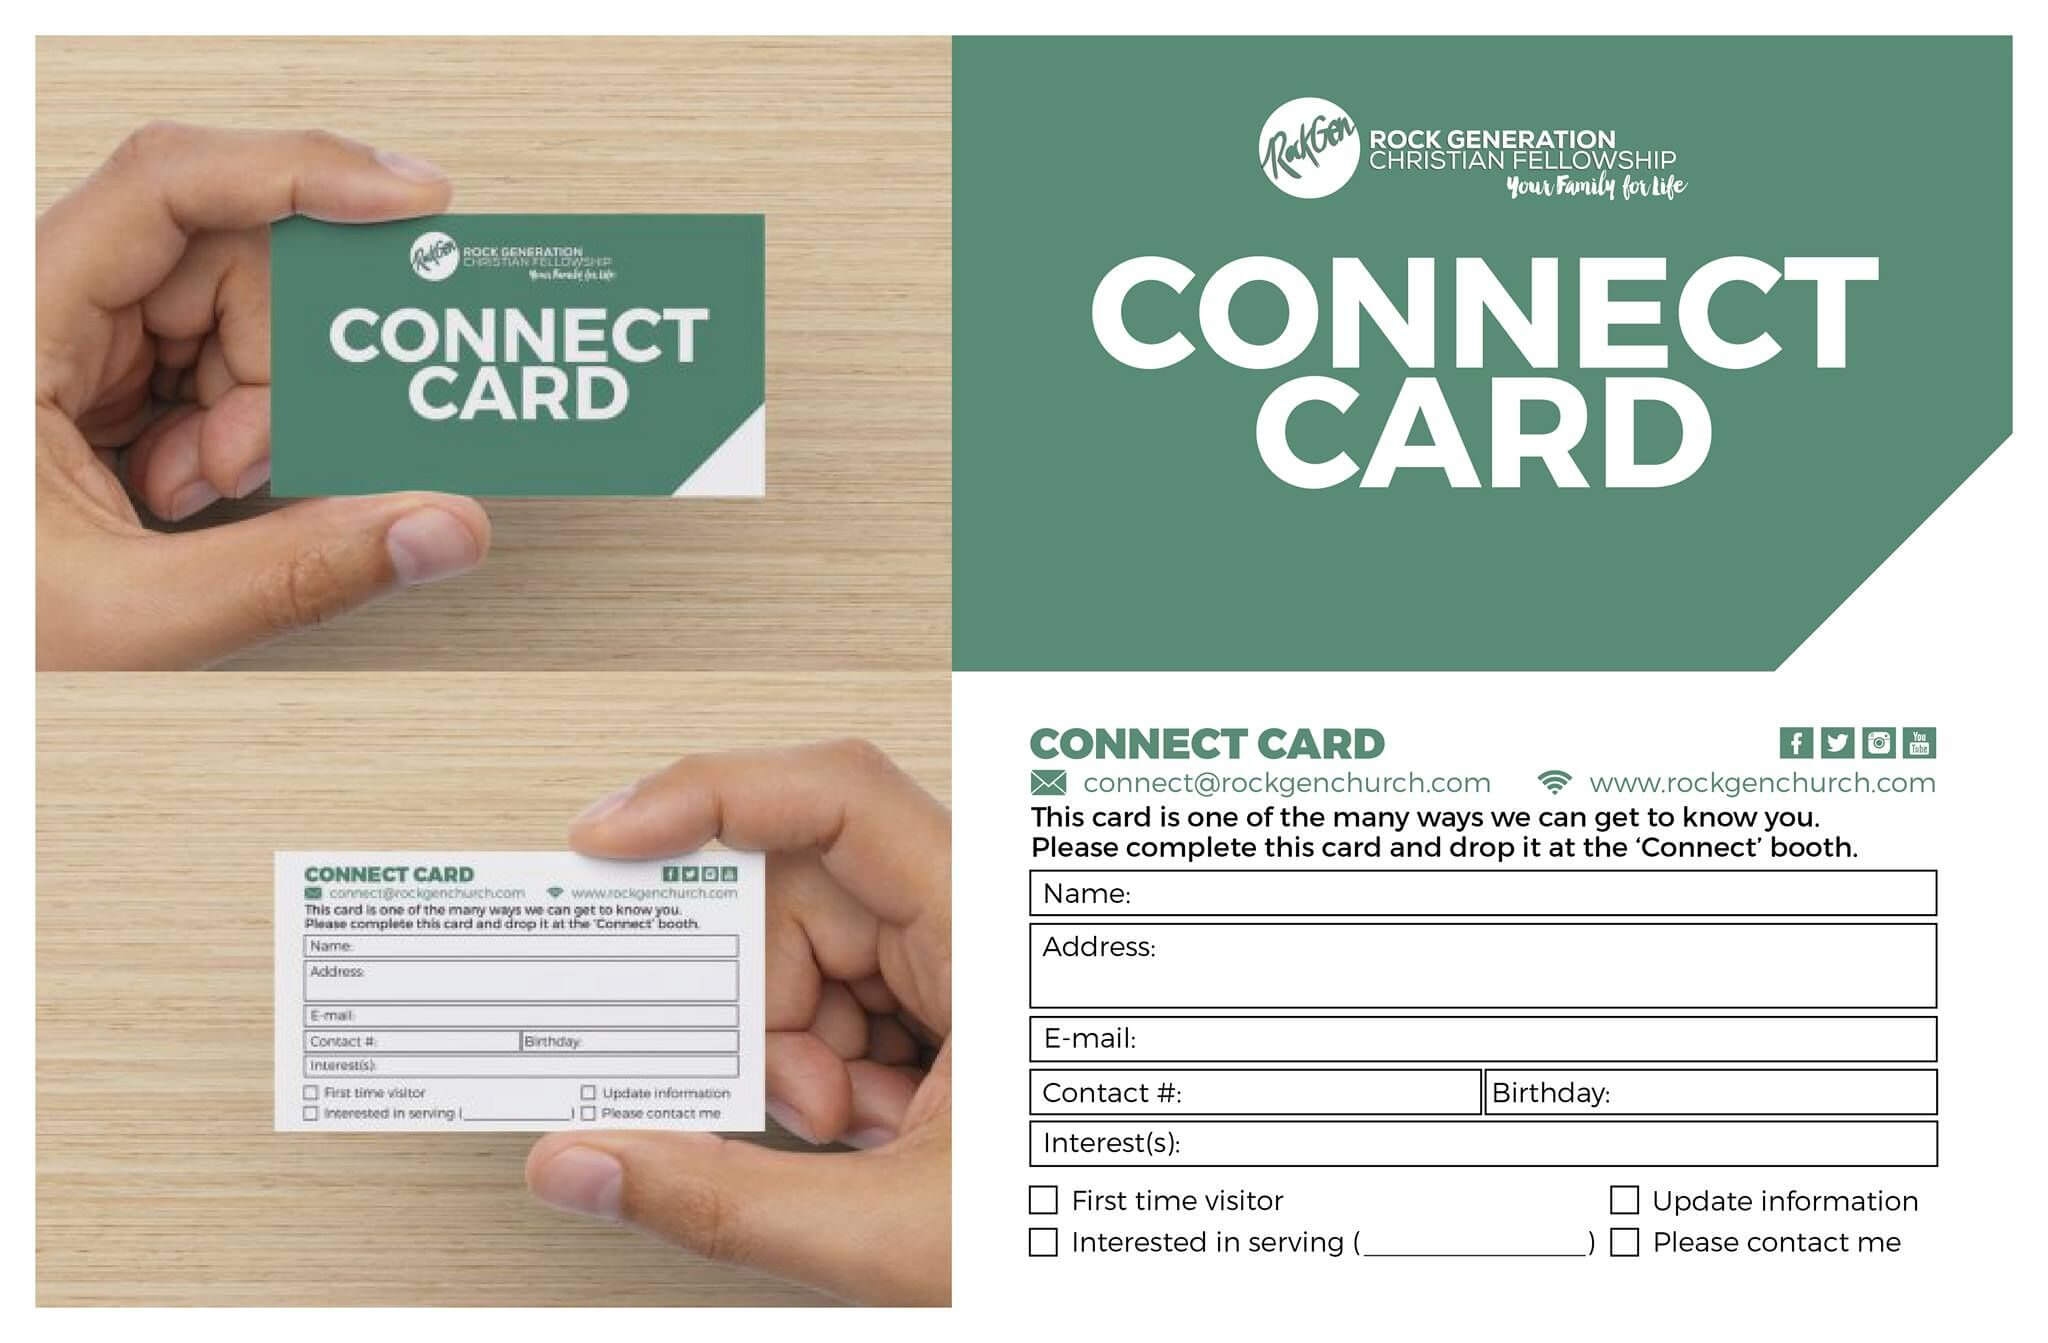 11 Awesome Church Connection Card Examples | Church Design For Church Visitor Card Template